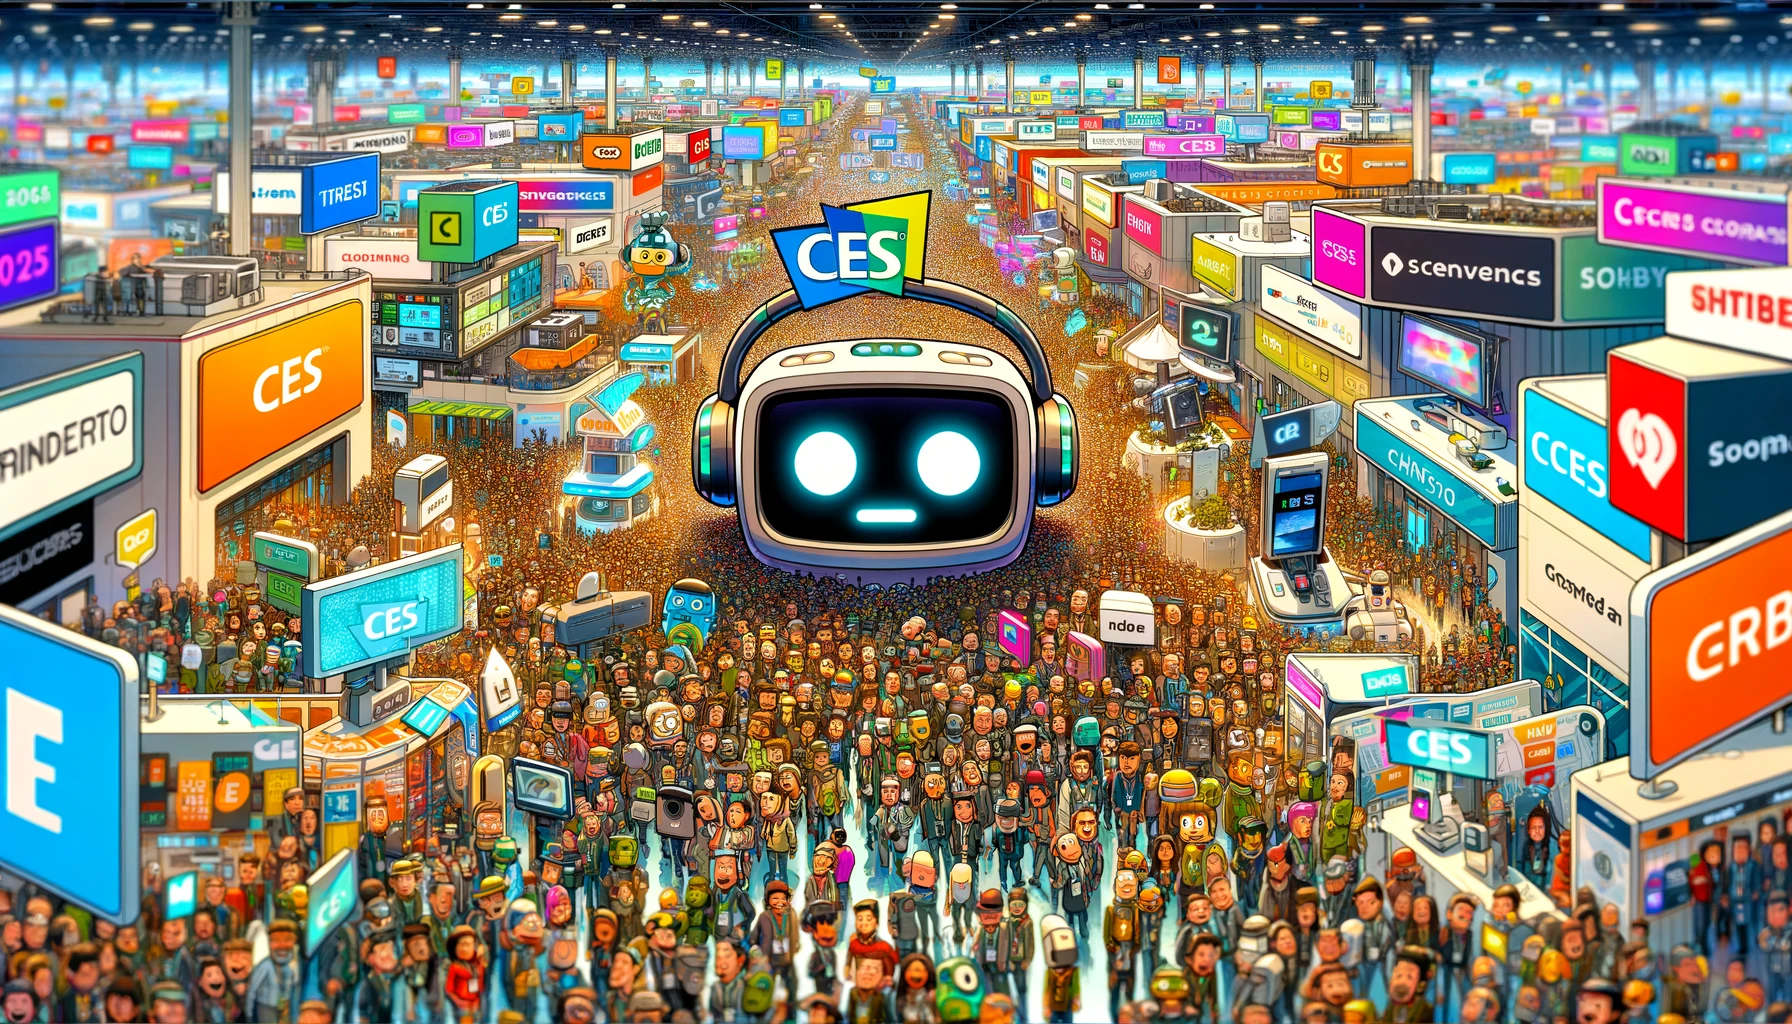 CES GPT: Our custom chatbot can answer all your CES questions